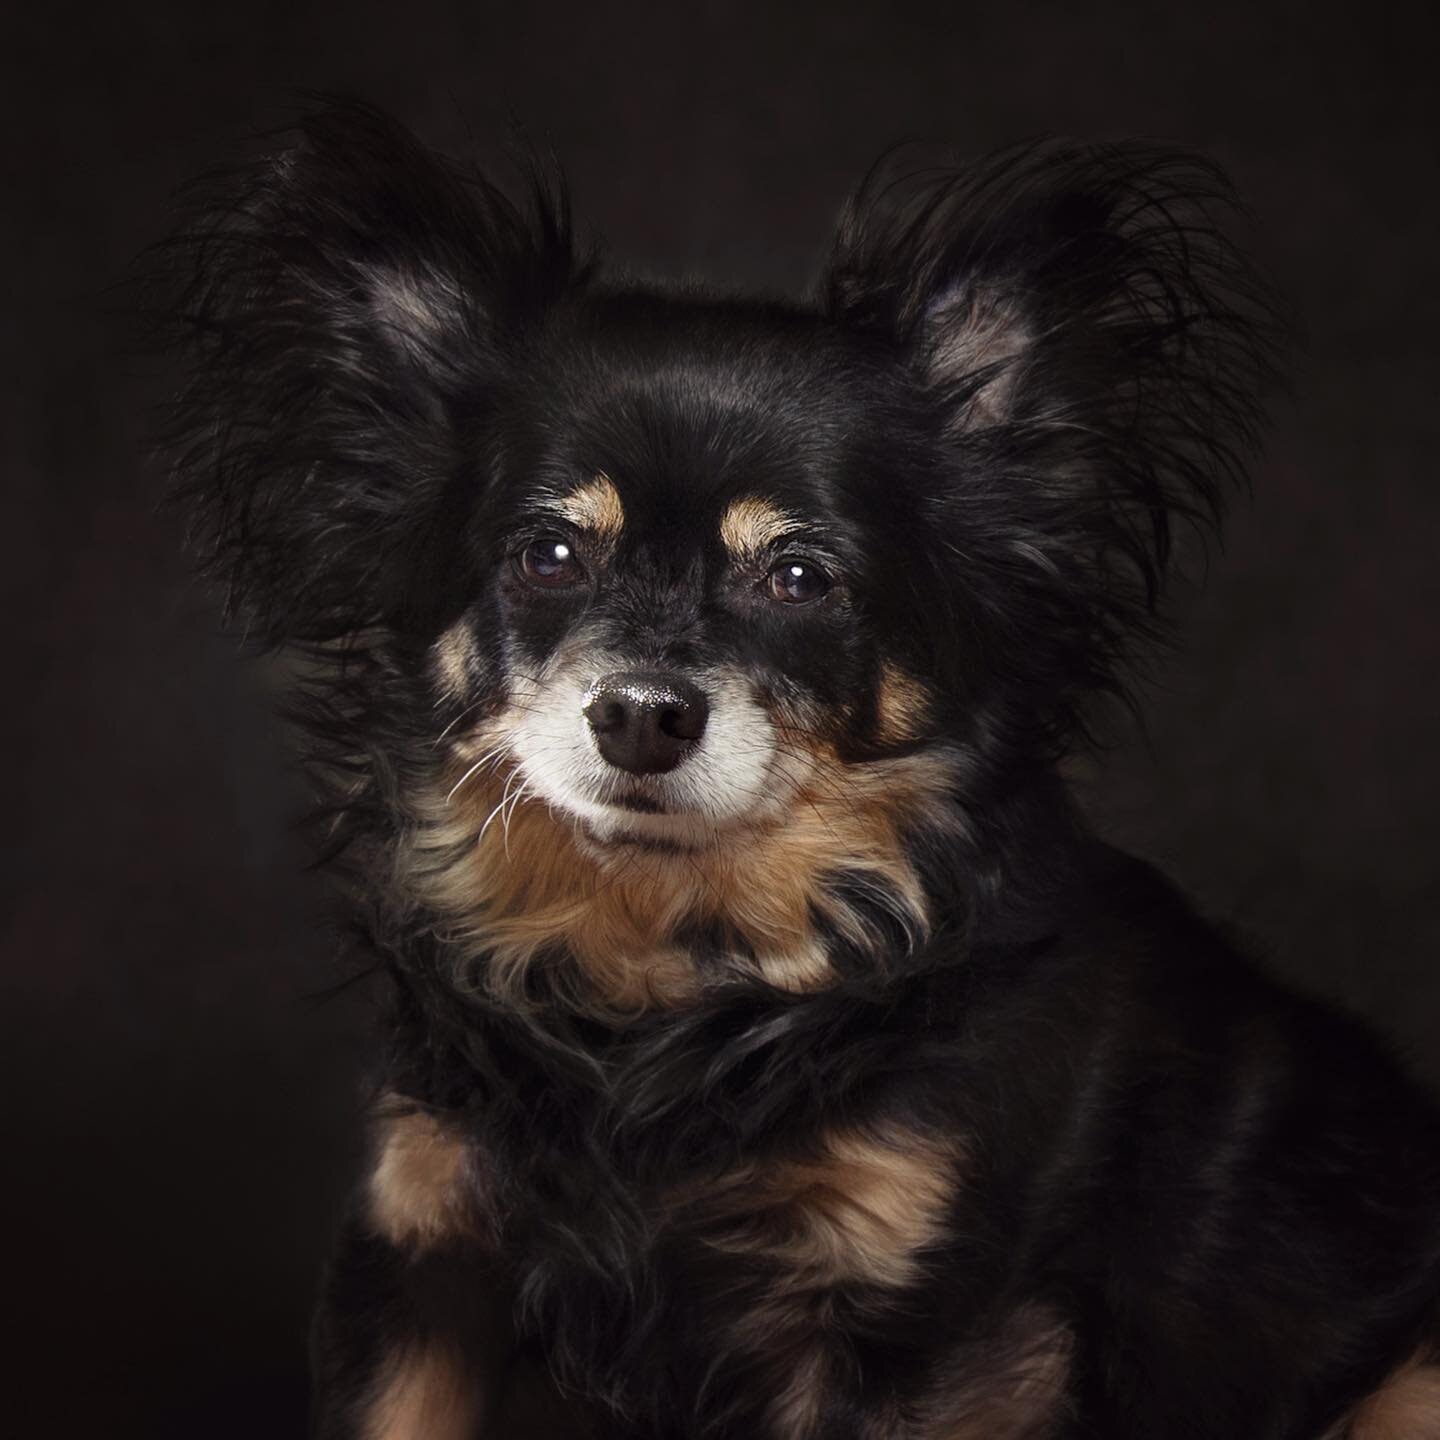 Mimi (Mo) is one of the most caring, attentive pups around, but they don&rsquo;t call her Mo for nothing&ndash; Shes also the toughest security pup in town! 🤗🐾 #regalmo #regal #mo #mimi #mimo #chihuahuamix chihuahua #distinguished #petportraiture #